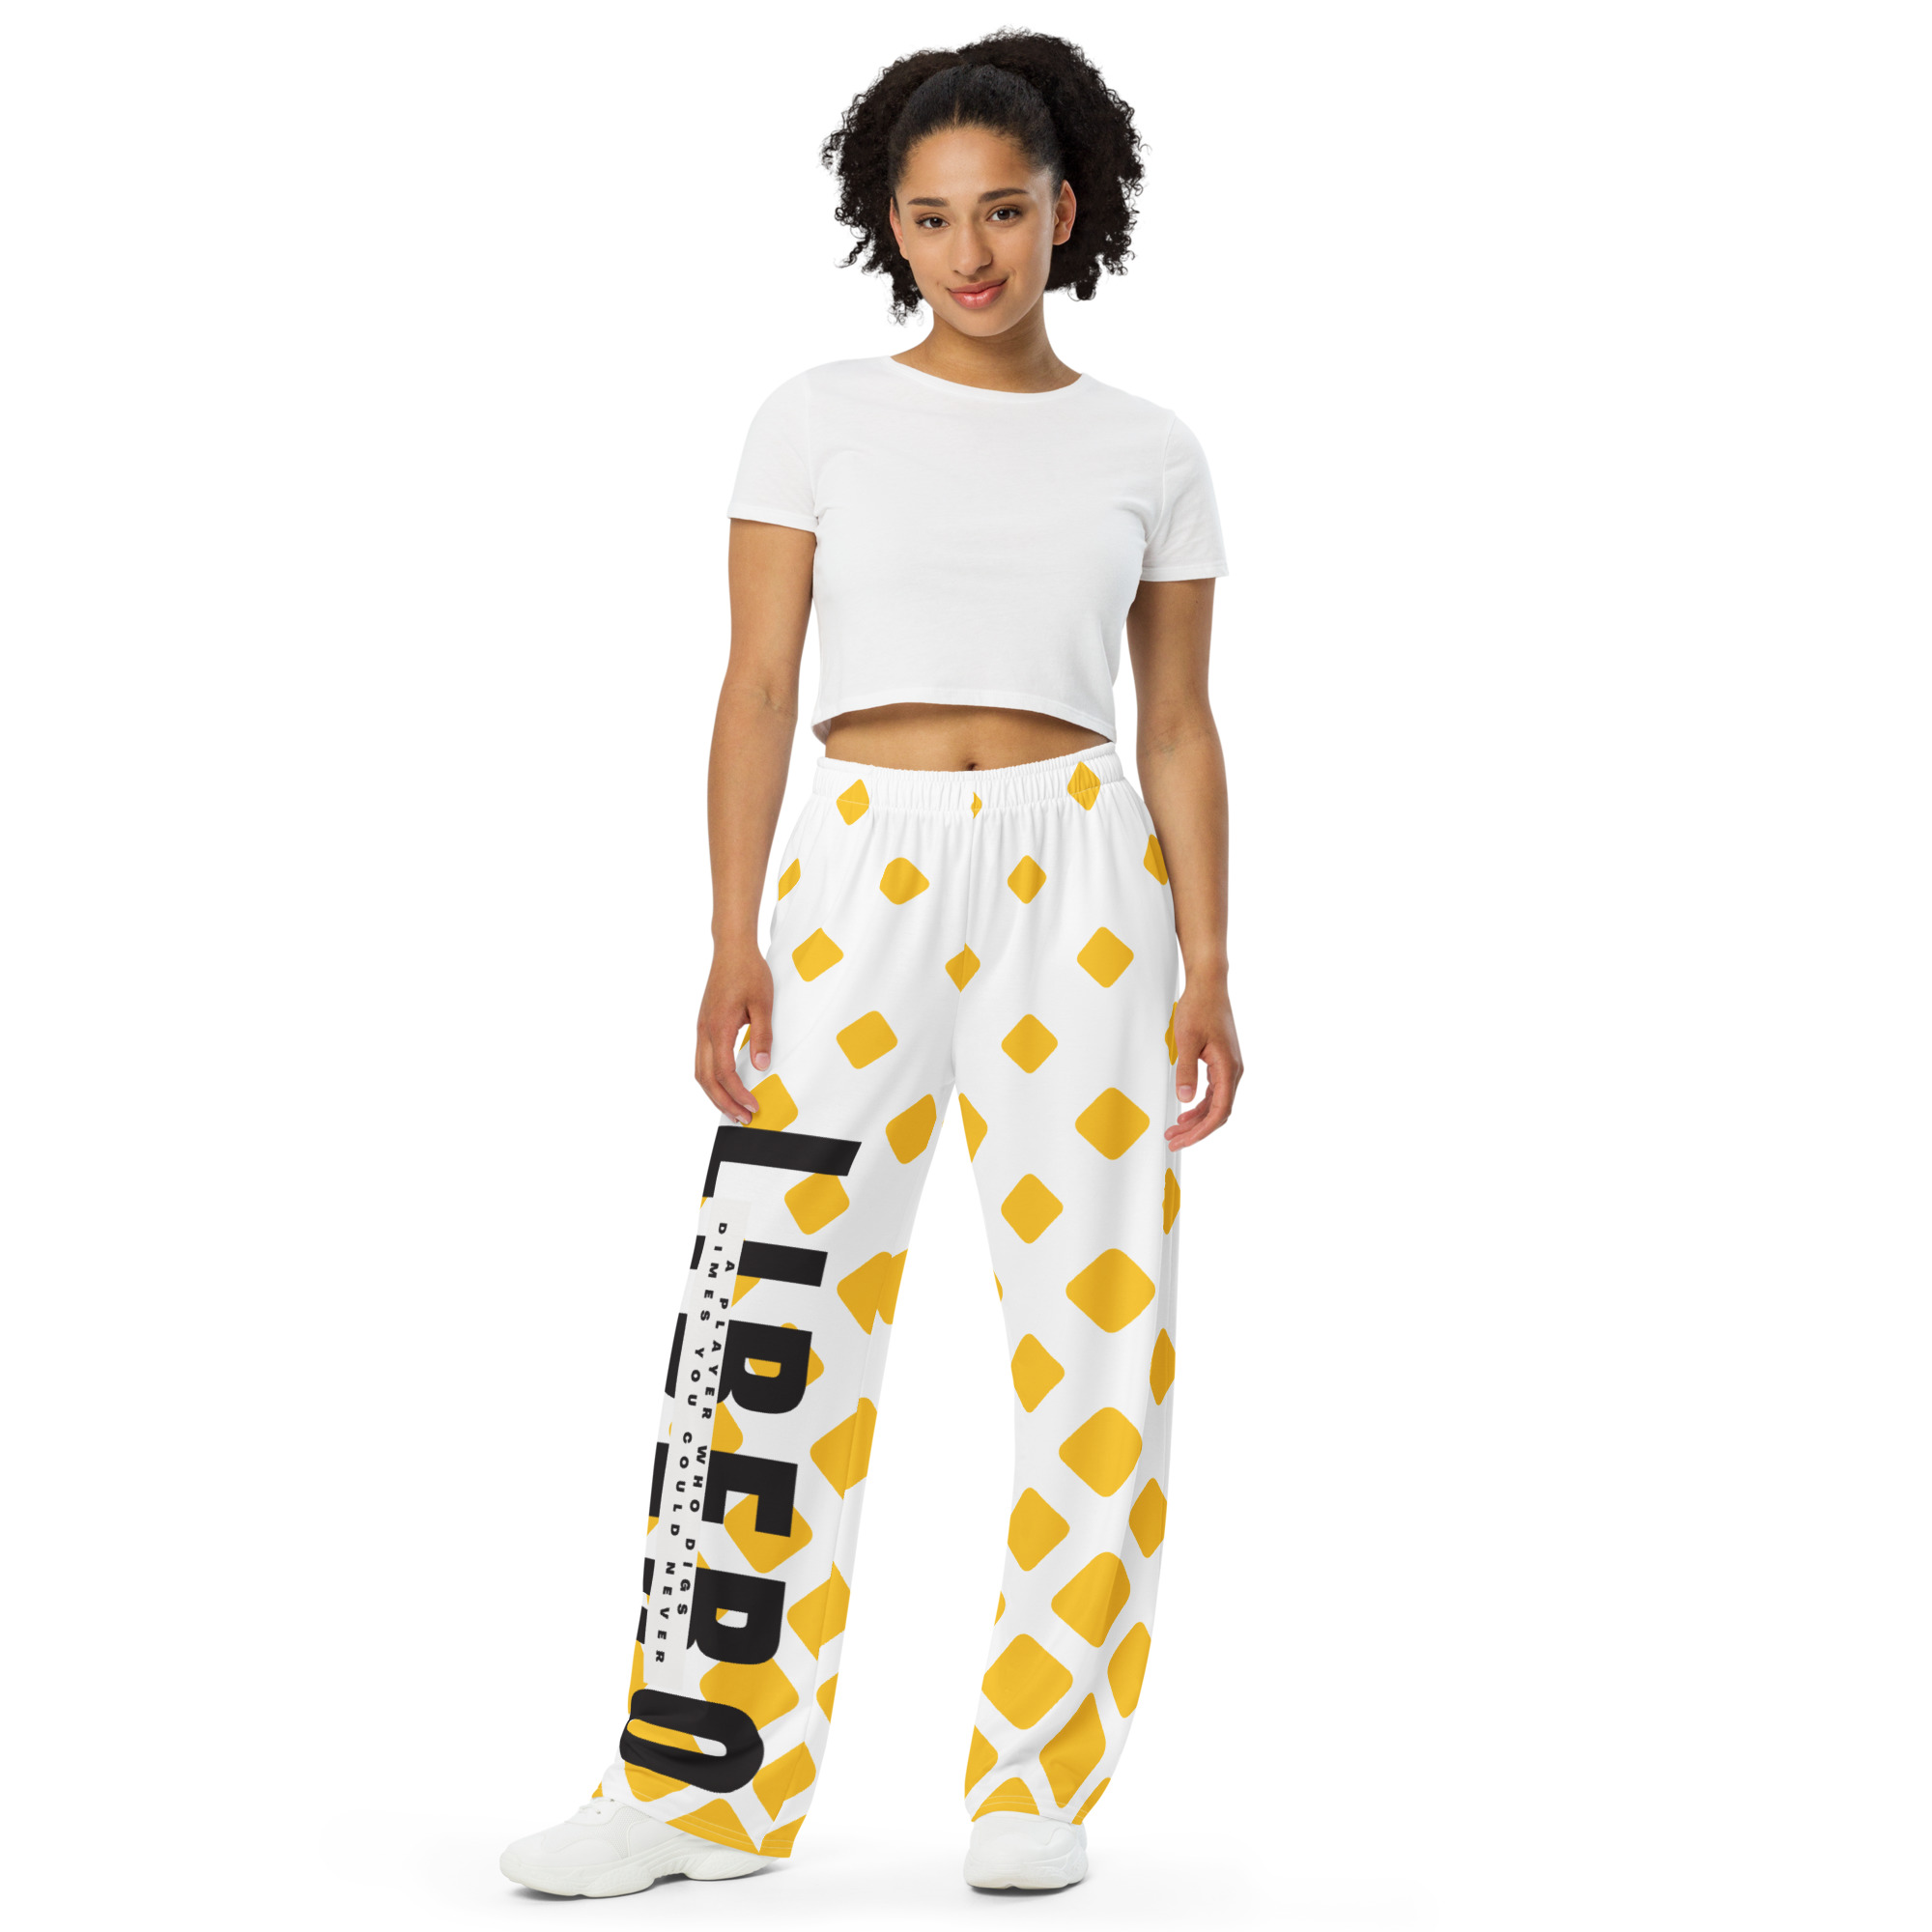 Hi my name is Coach April and I create inspiring volleyball designs on cute motivational volleyball clothes that empower volleyball players like these yellow pajama pj pants that hype up liberos.